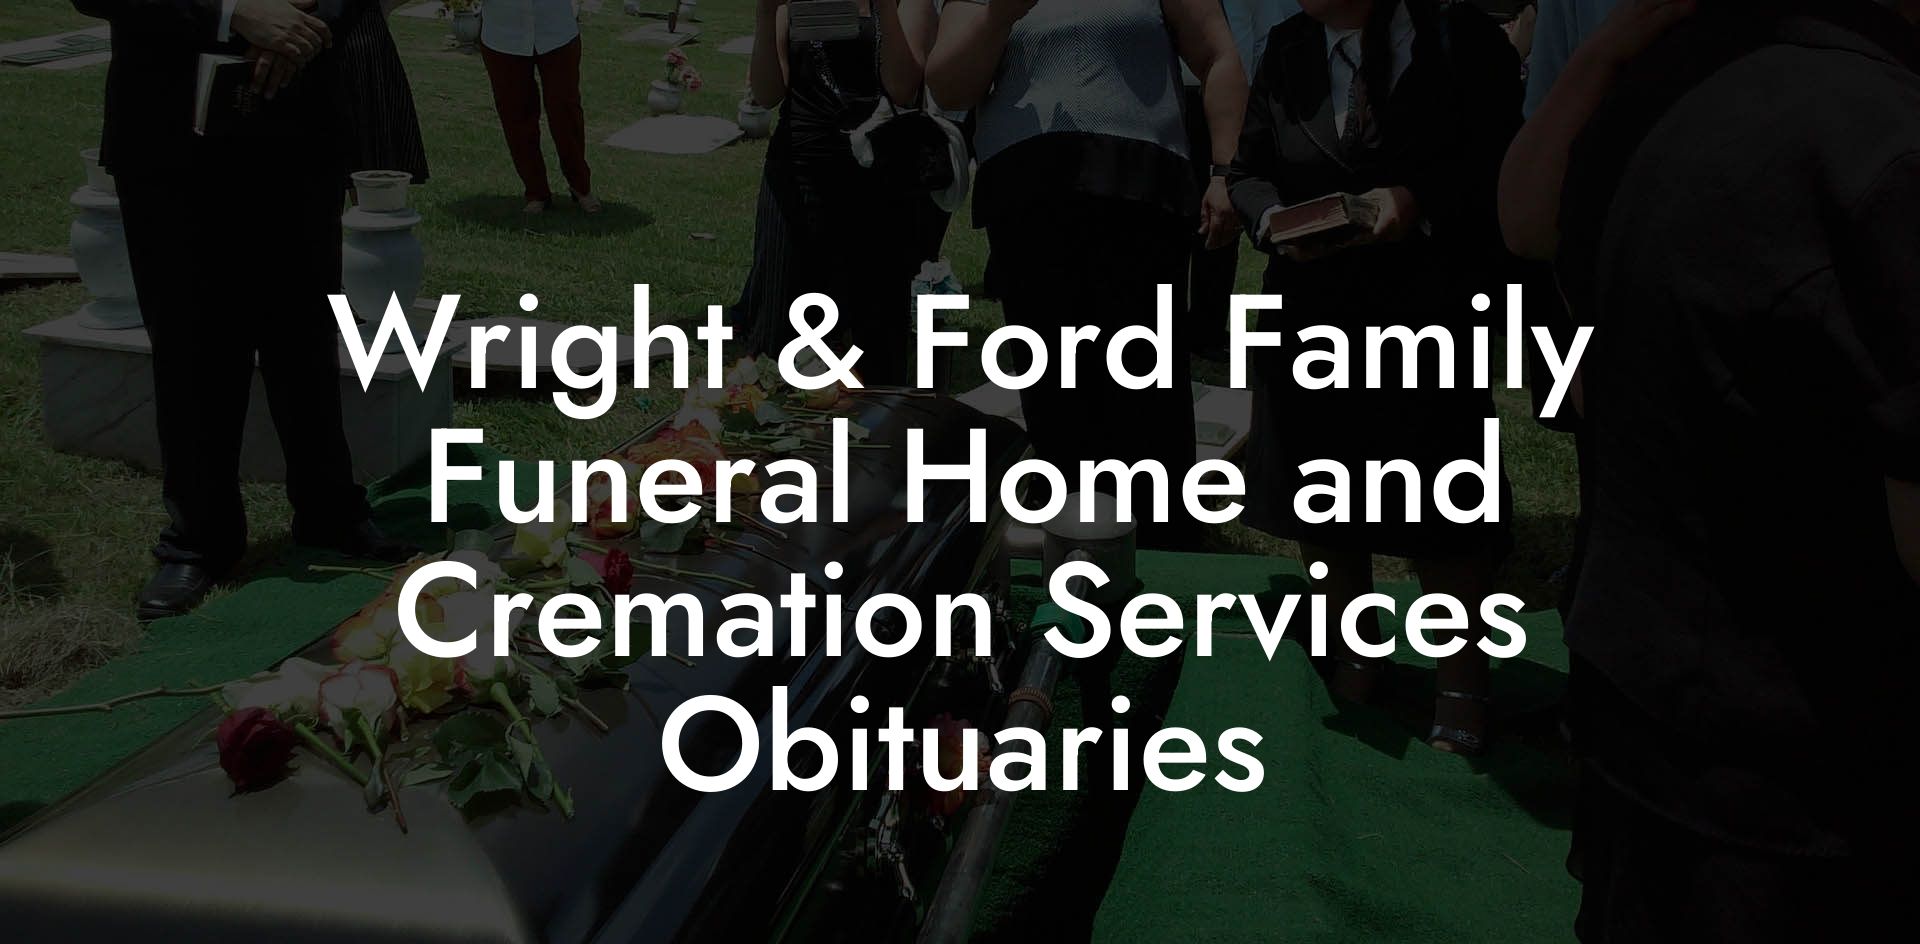 Wright & Ford Family Funeral Home and Cremation Services Obituaries